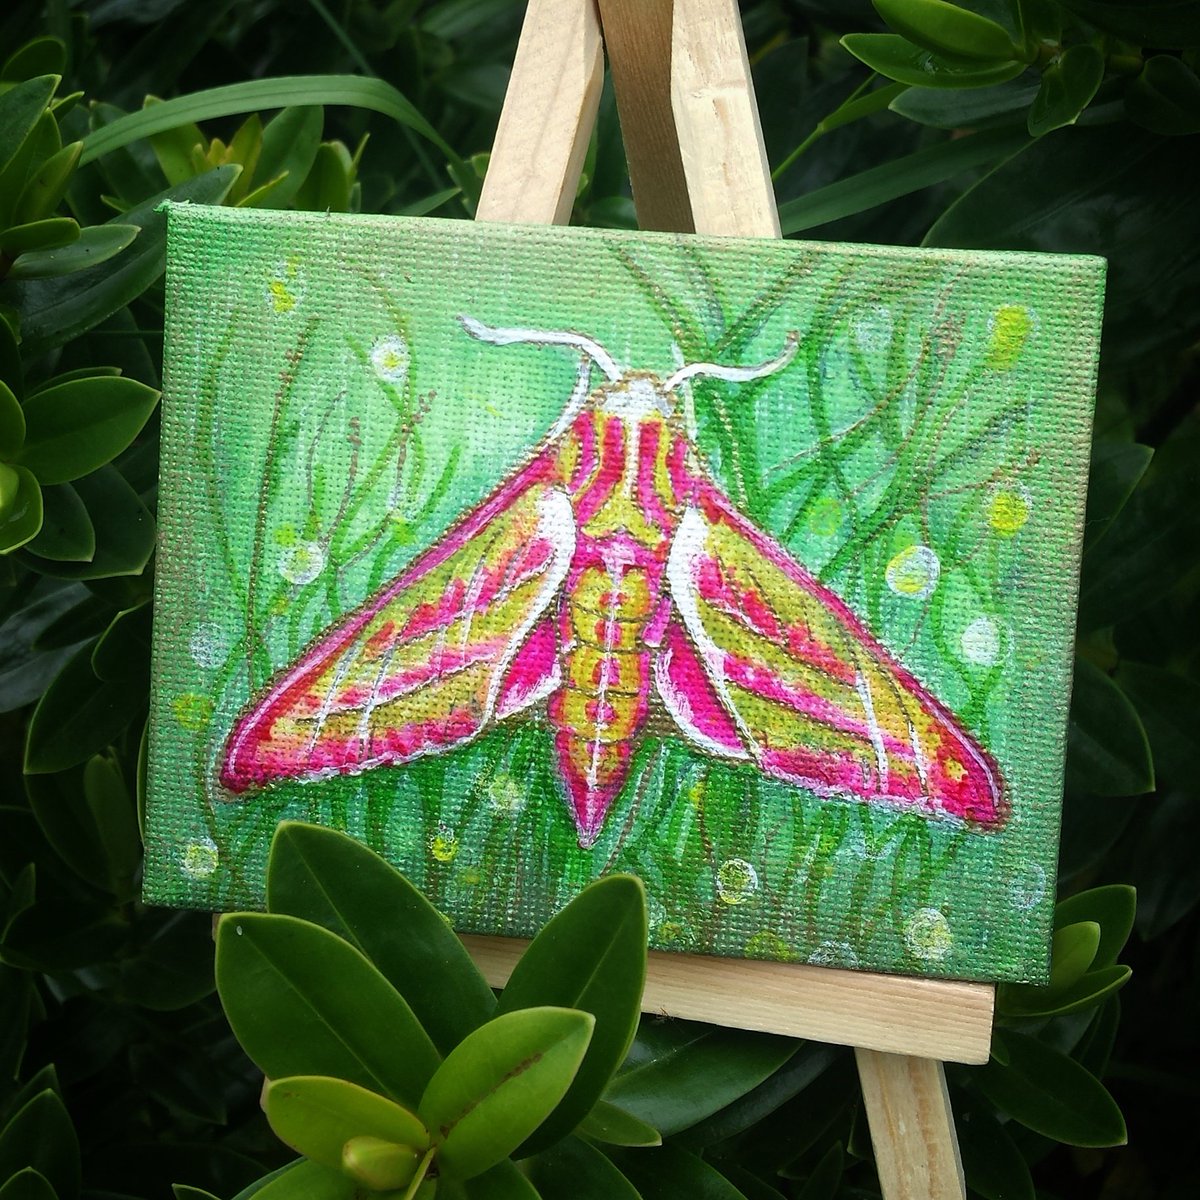 A mini canvas (only 8cm long) of a lifesize #elephanthawkmoth - #acrylics & gold ink #moth #painting #nature #picoftheday #art #30DaysWild